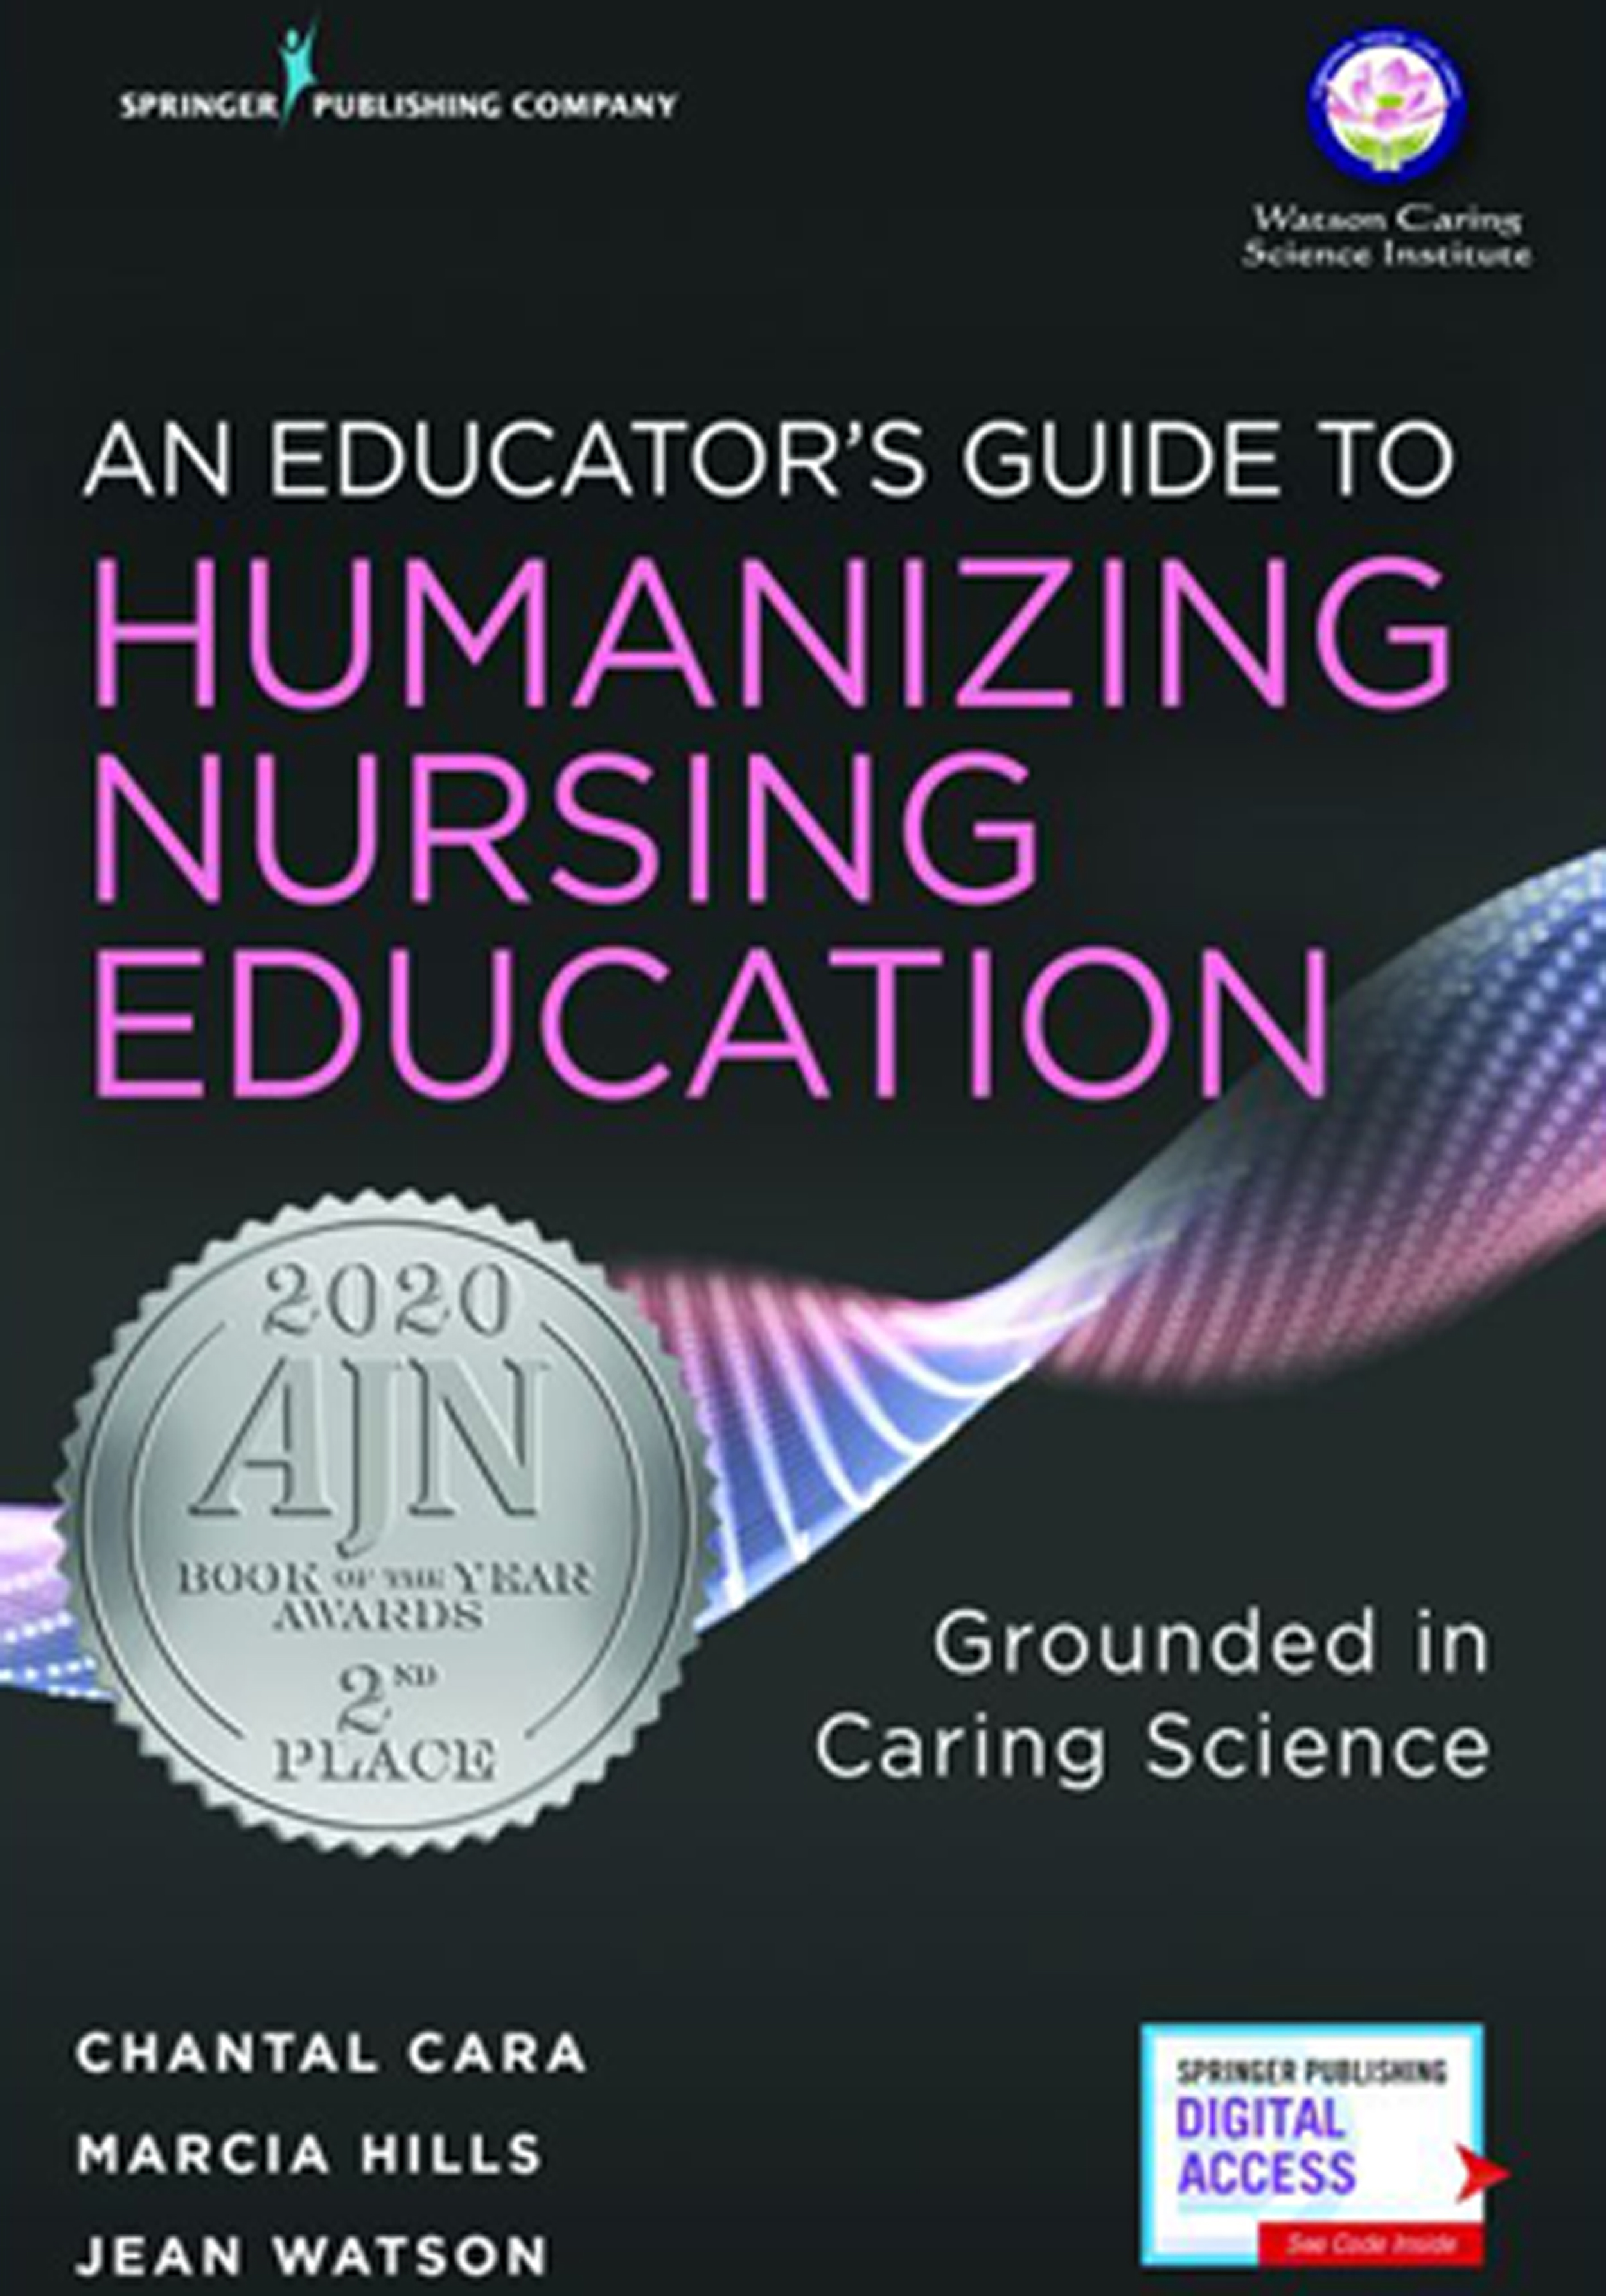 An Educator's Guide to Humanizing Nursing Education - Grounded in Caring Science